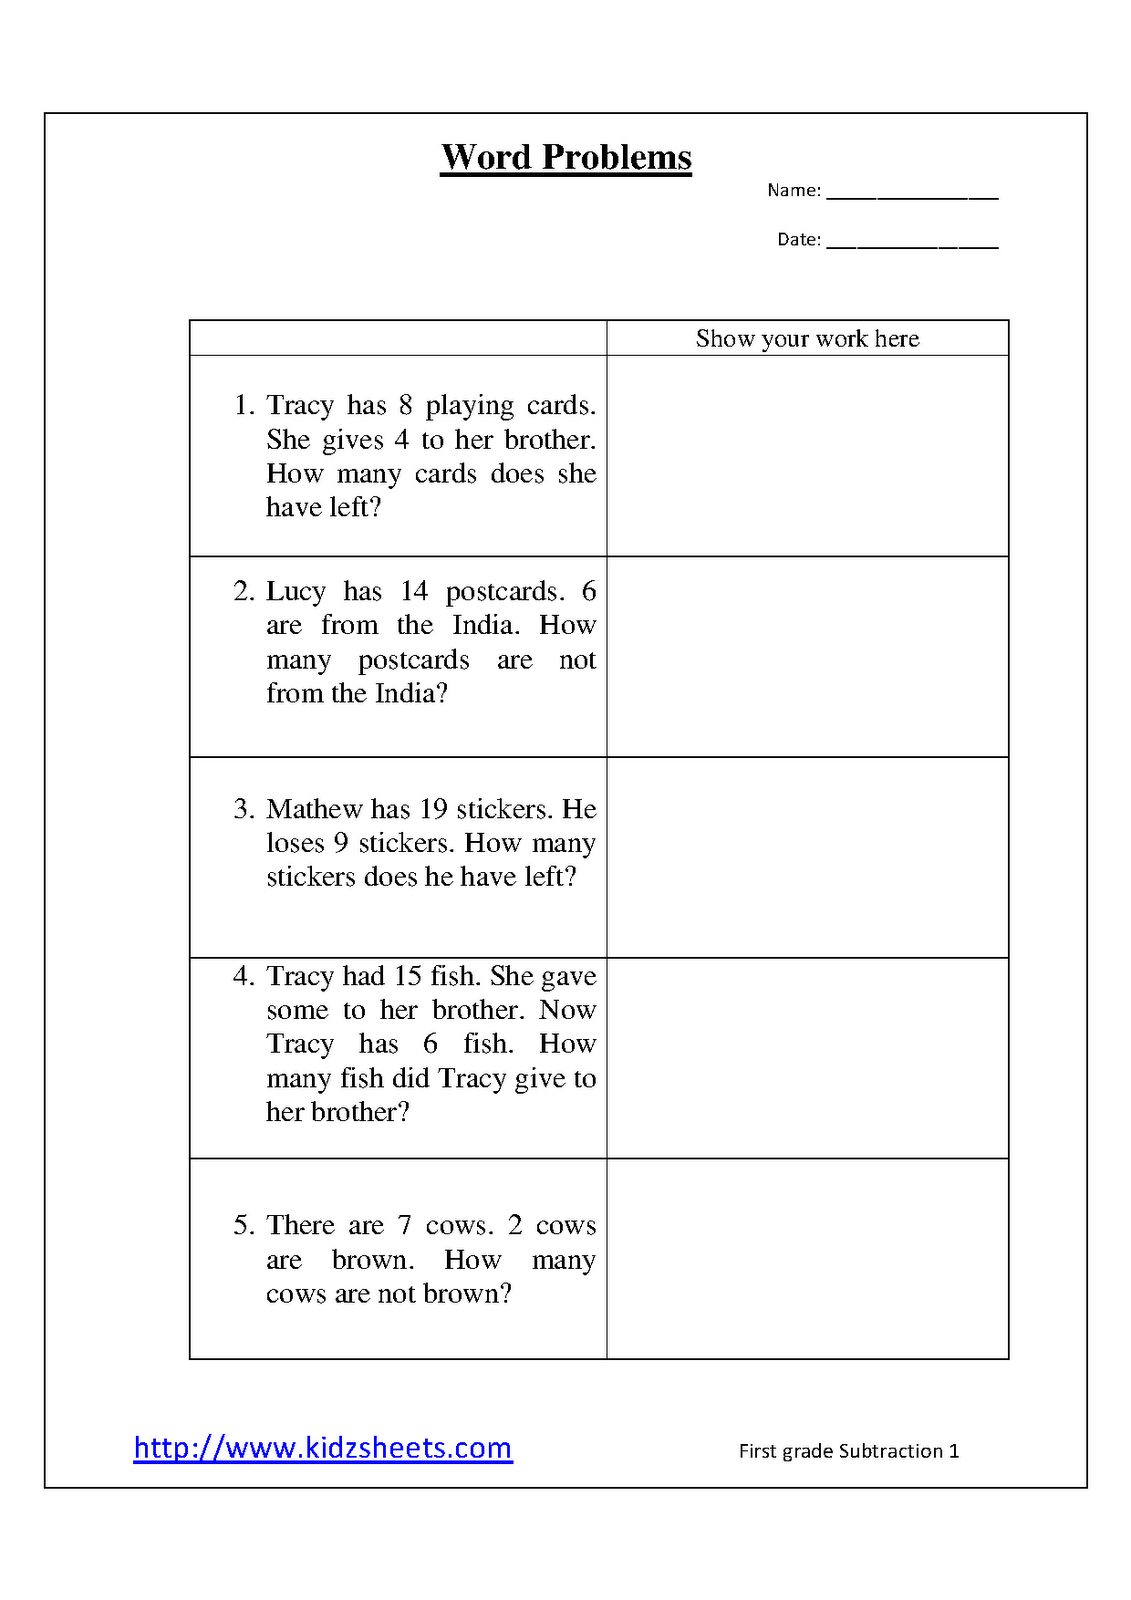 free-printable-math-worksheets-word-problems-first-grade